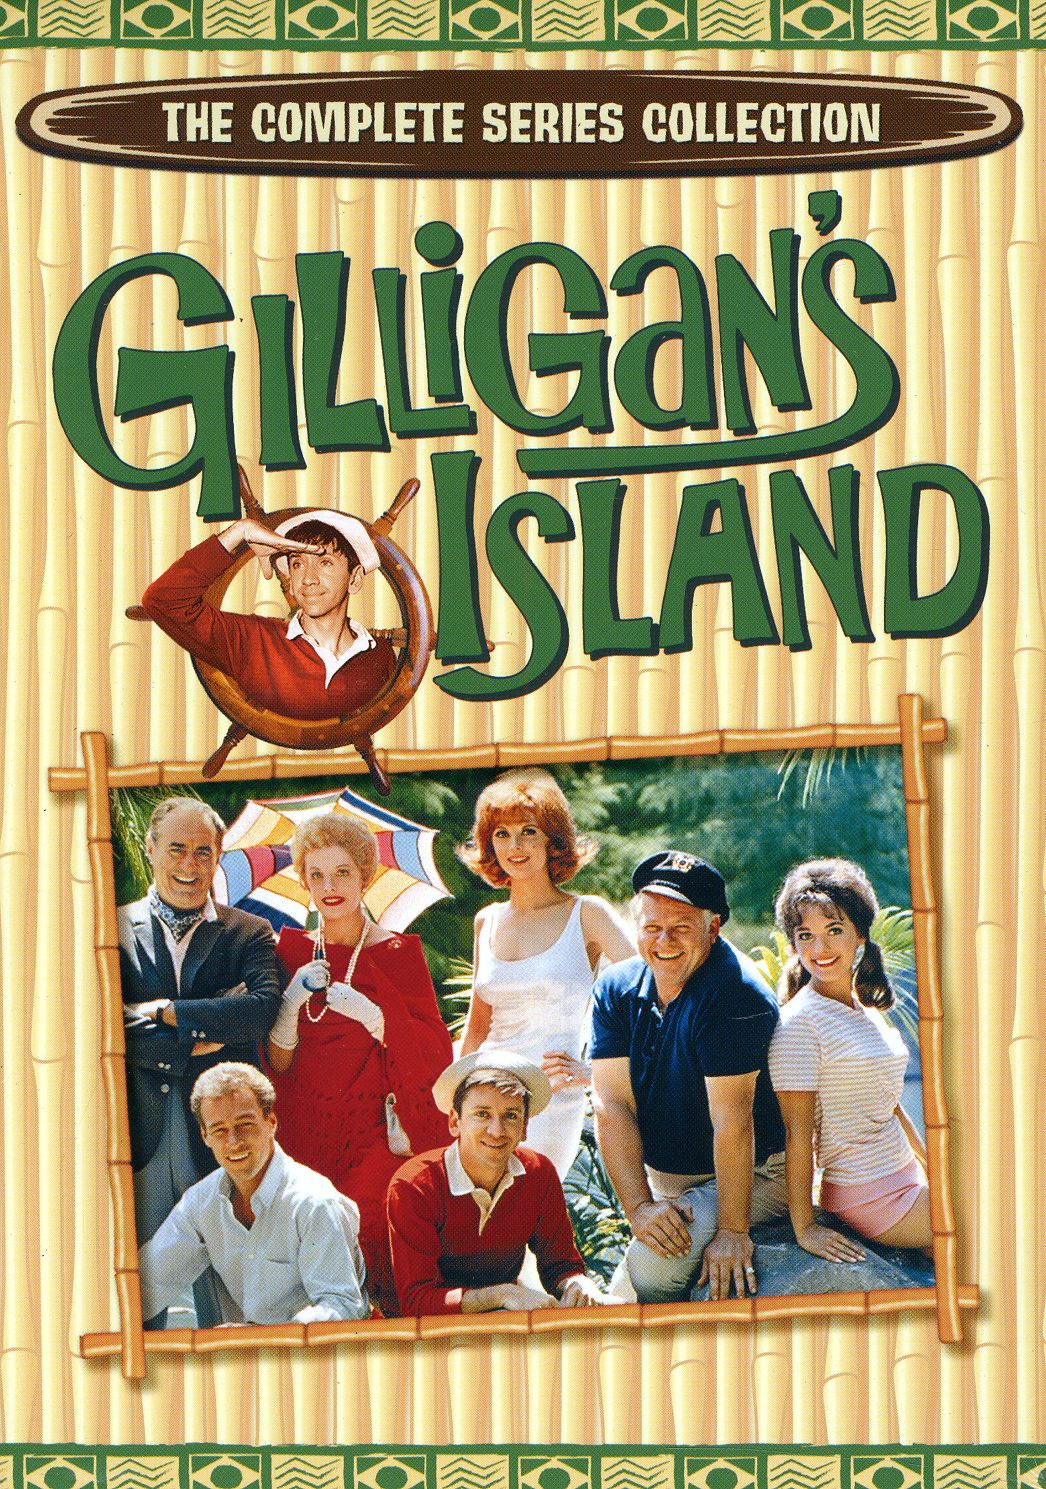 GILLIGAN'S ISLAND: COMPLETE SERIES COLLECTION